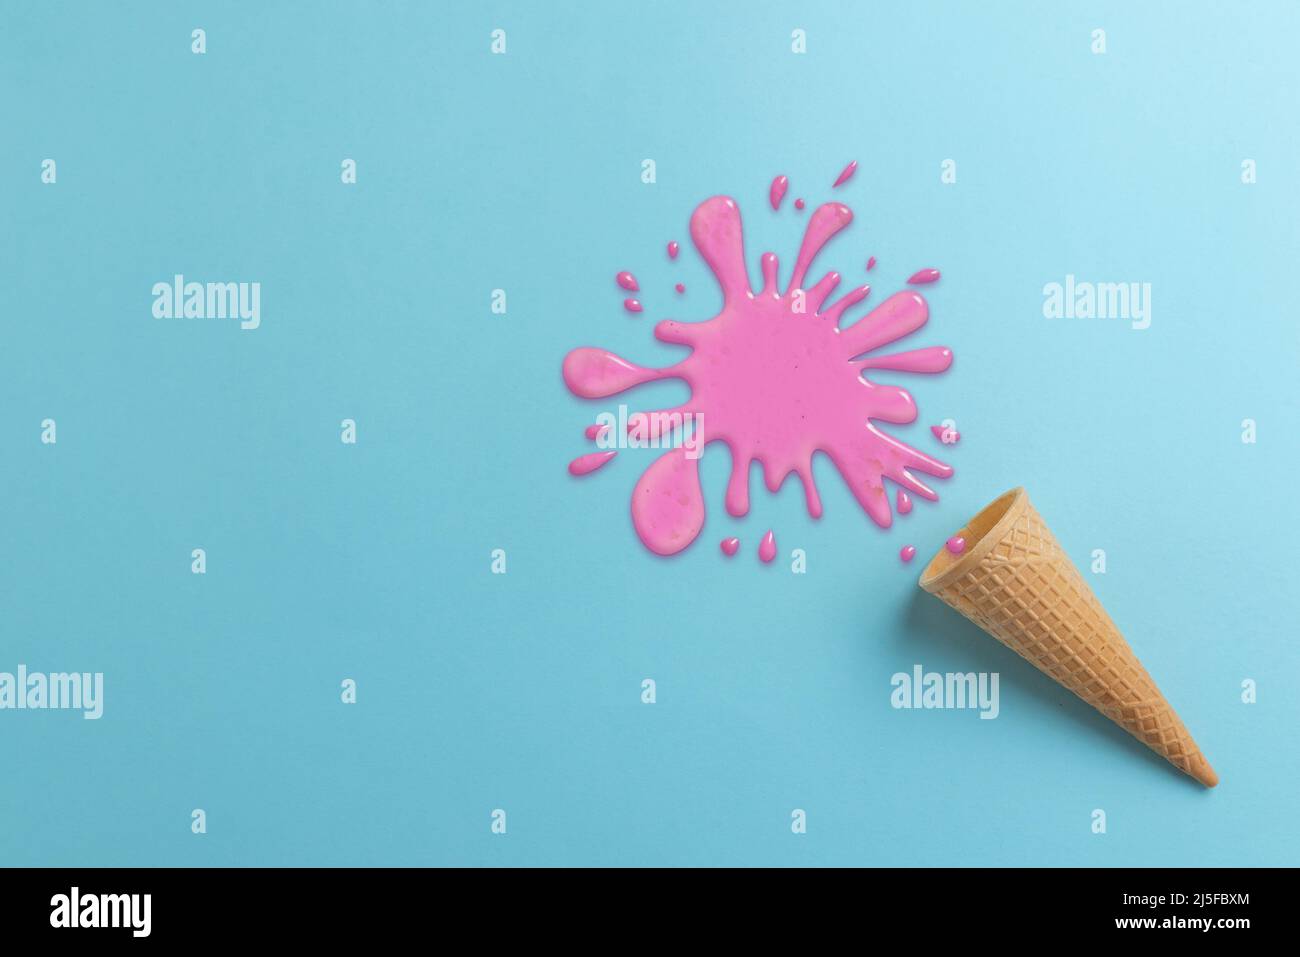 Dropped ice cream on cyan surface concept. Spilled pink cream. Top view, flat lay composition Stock Photo